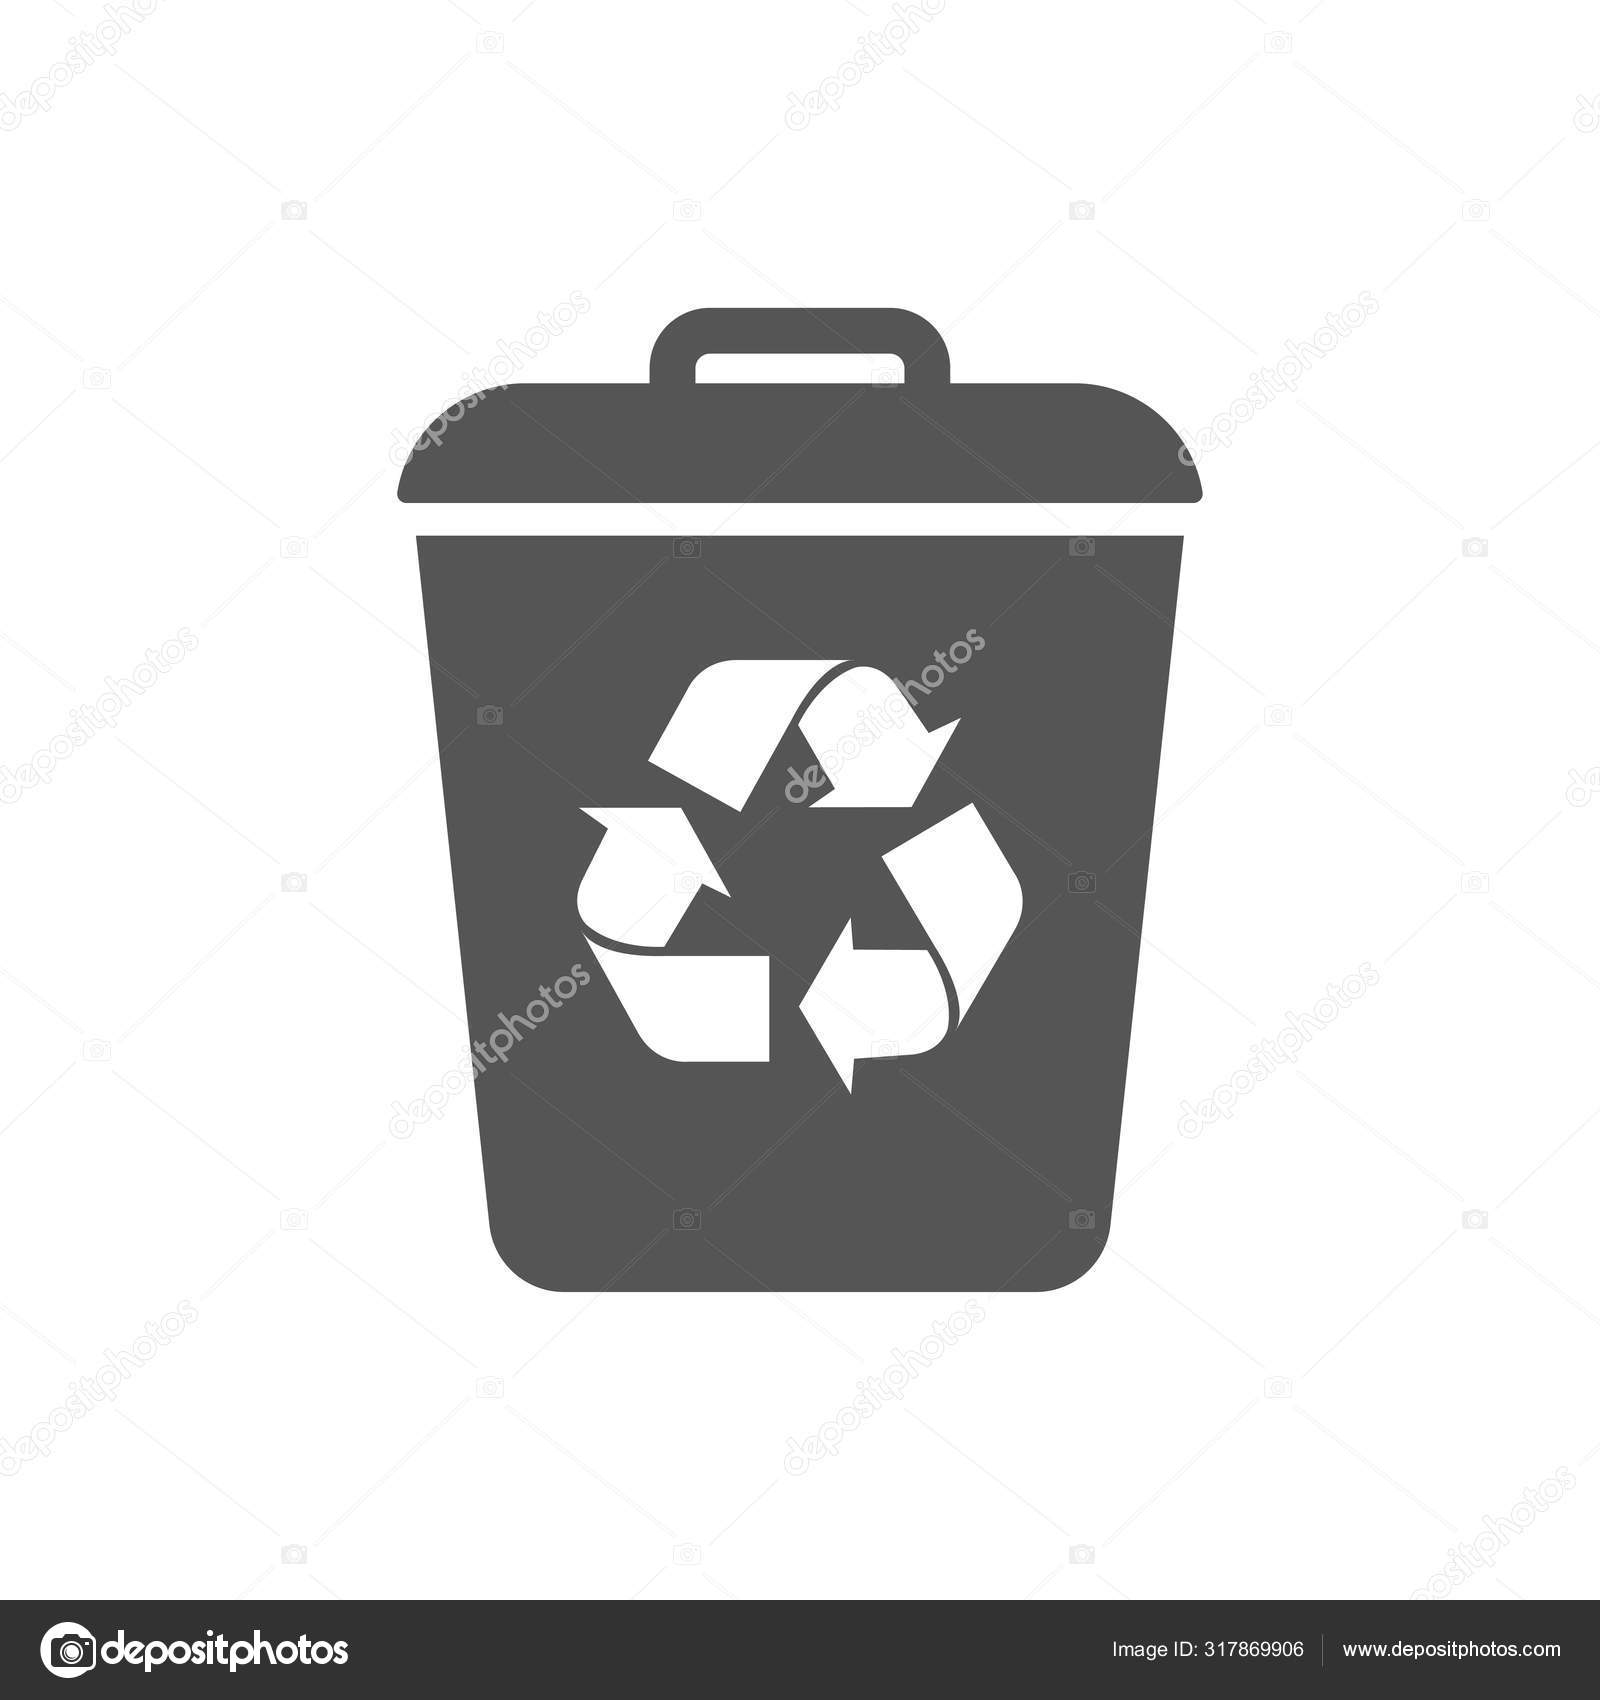 Garbage Trash Can Vector Icon Eco Bio Concept Recycling Flat Design Illustration Isolated On White Background Black Sign For Web Website Eps 10 Stock Vector C Defmorph1